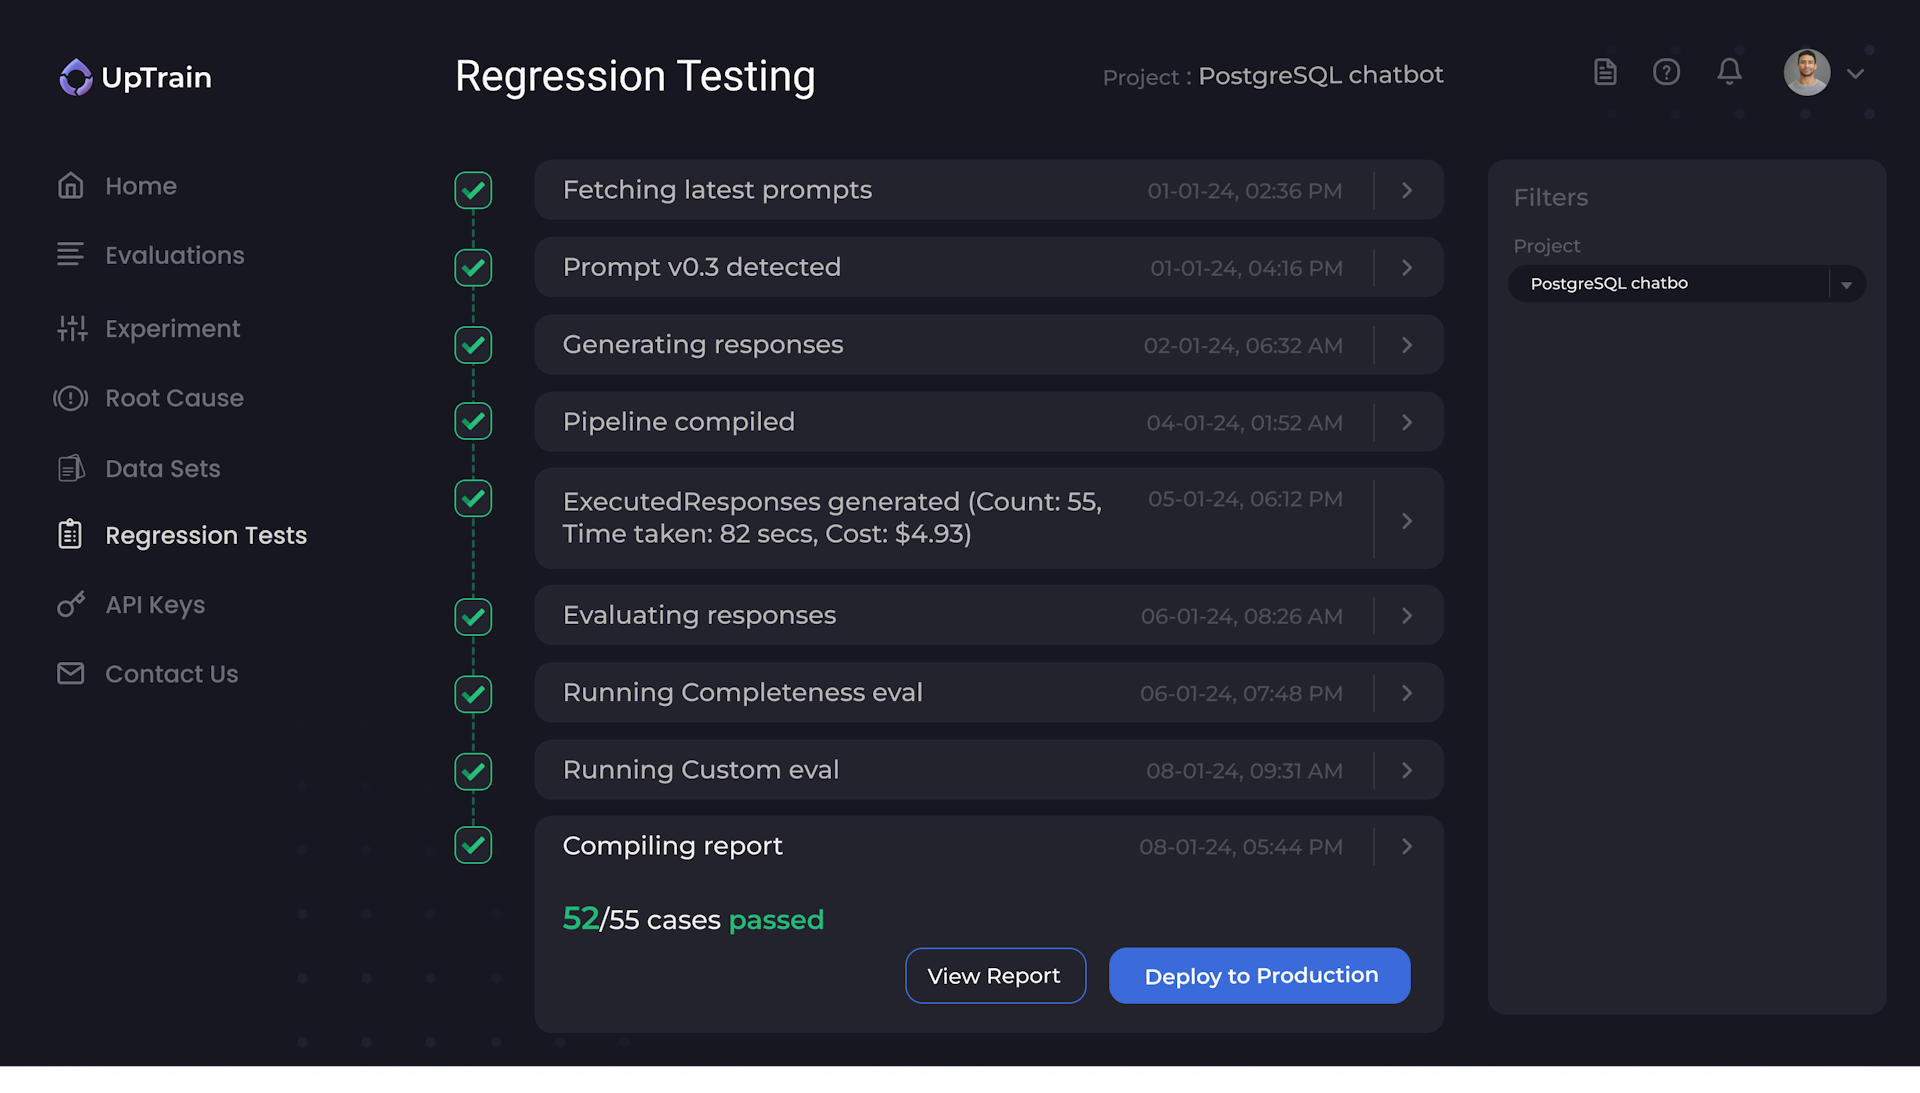 UpTrain Dashboard for regression testing where any prompt or code change automatically triggers generation of LLM responses and evaluations.